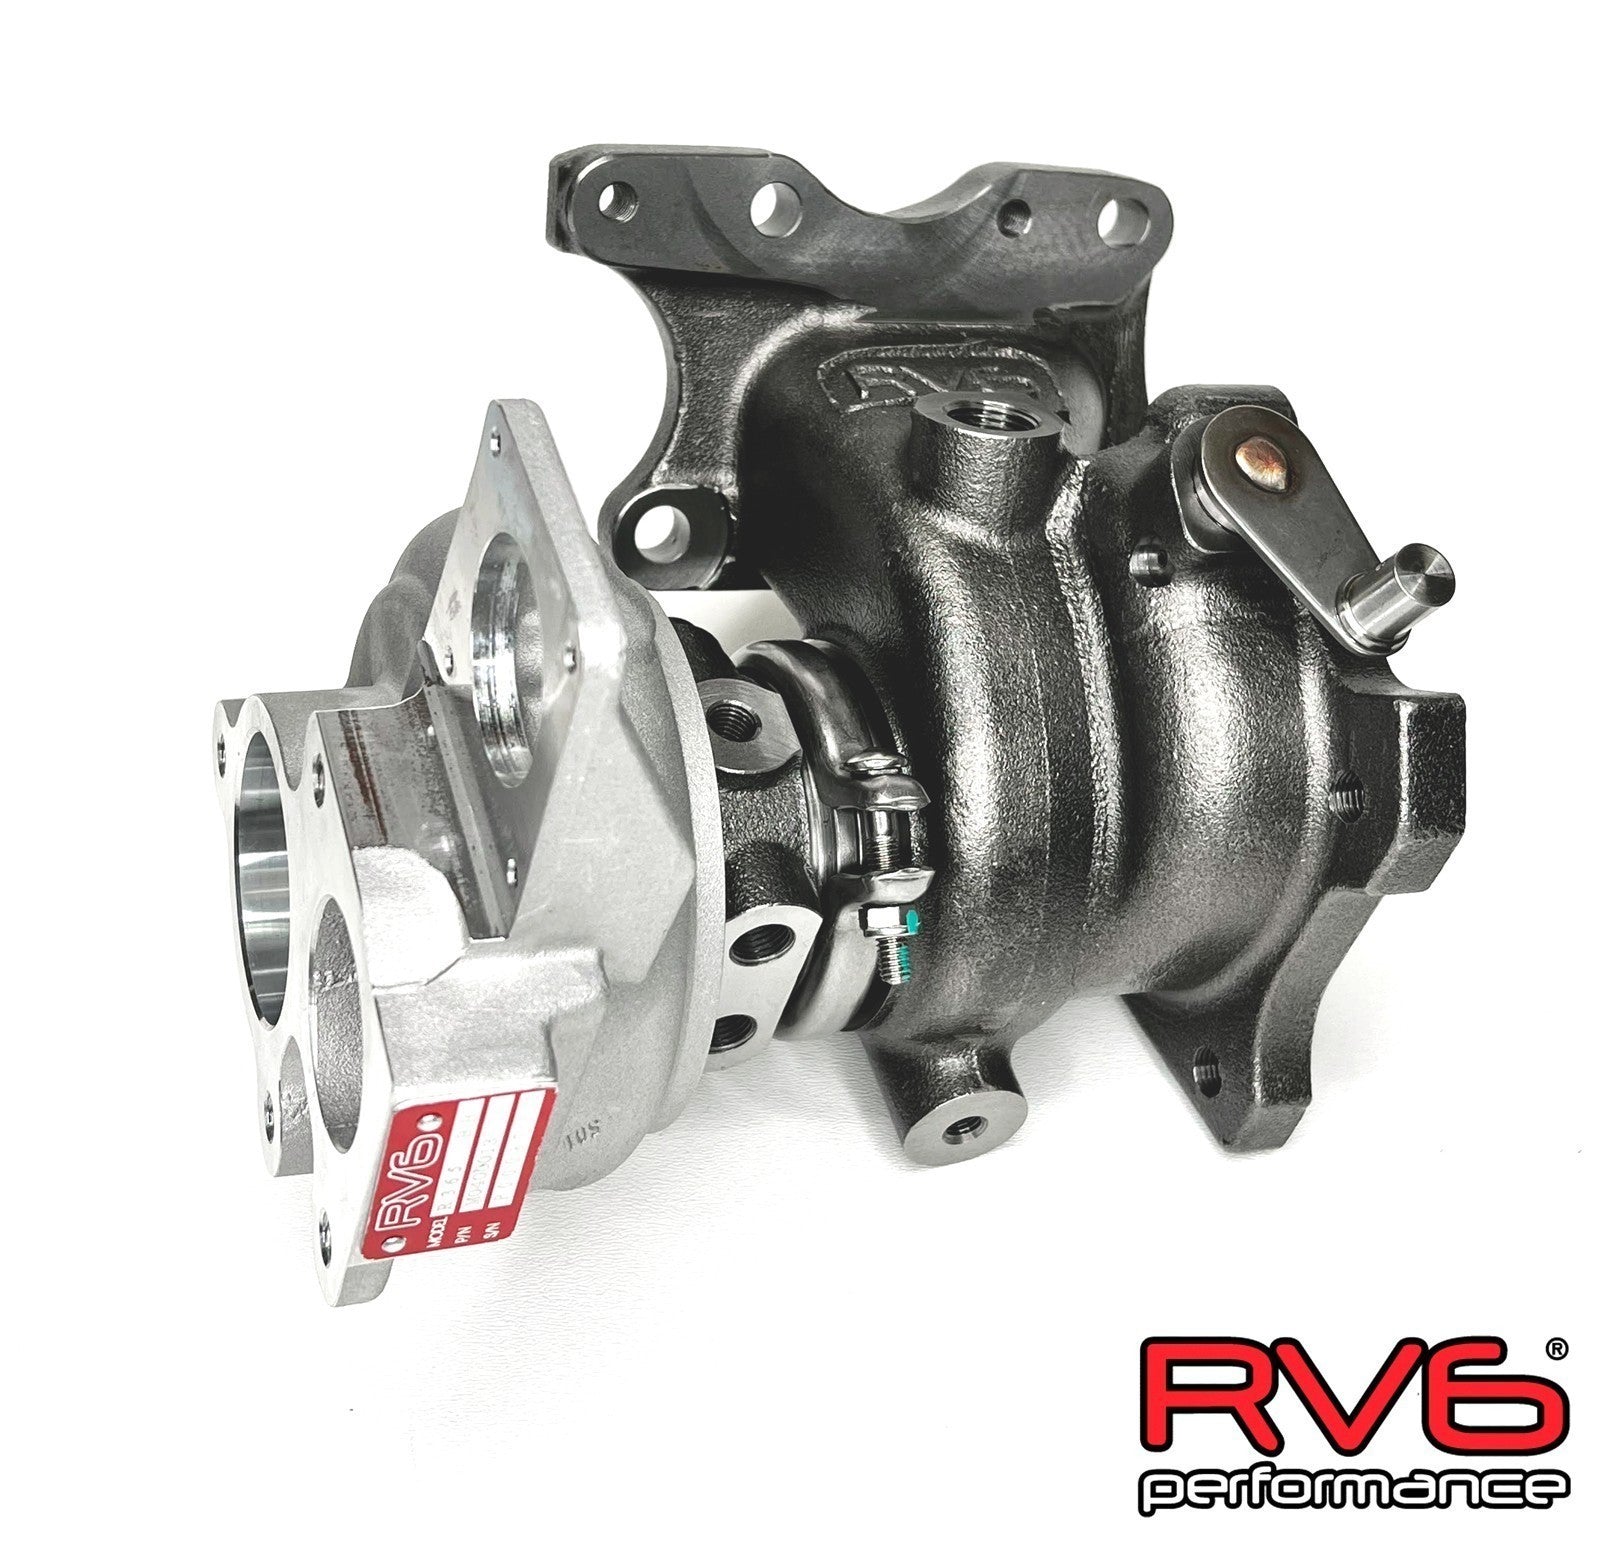 RV6 R365 RED Ball Bearing Turbo for 1.5T CivicX Batch 1